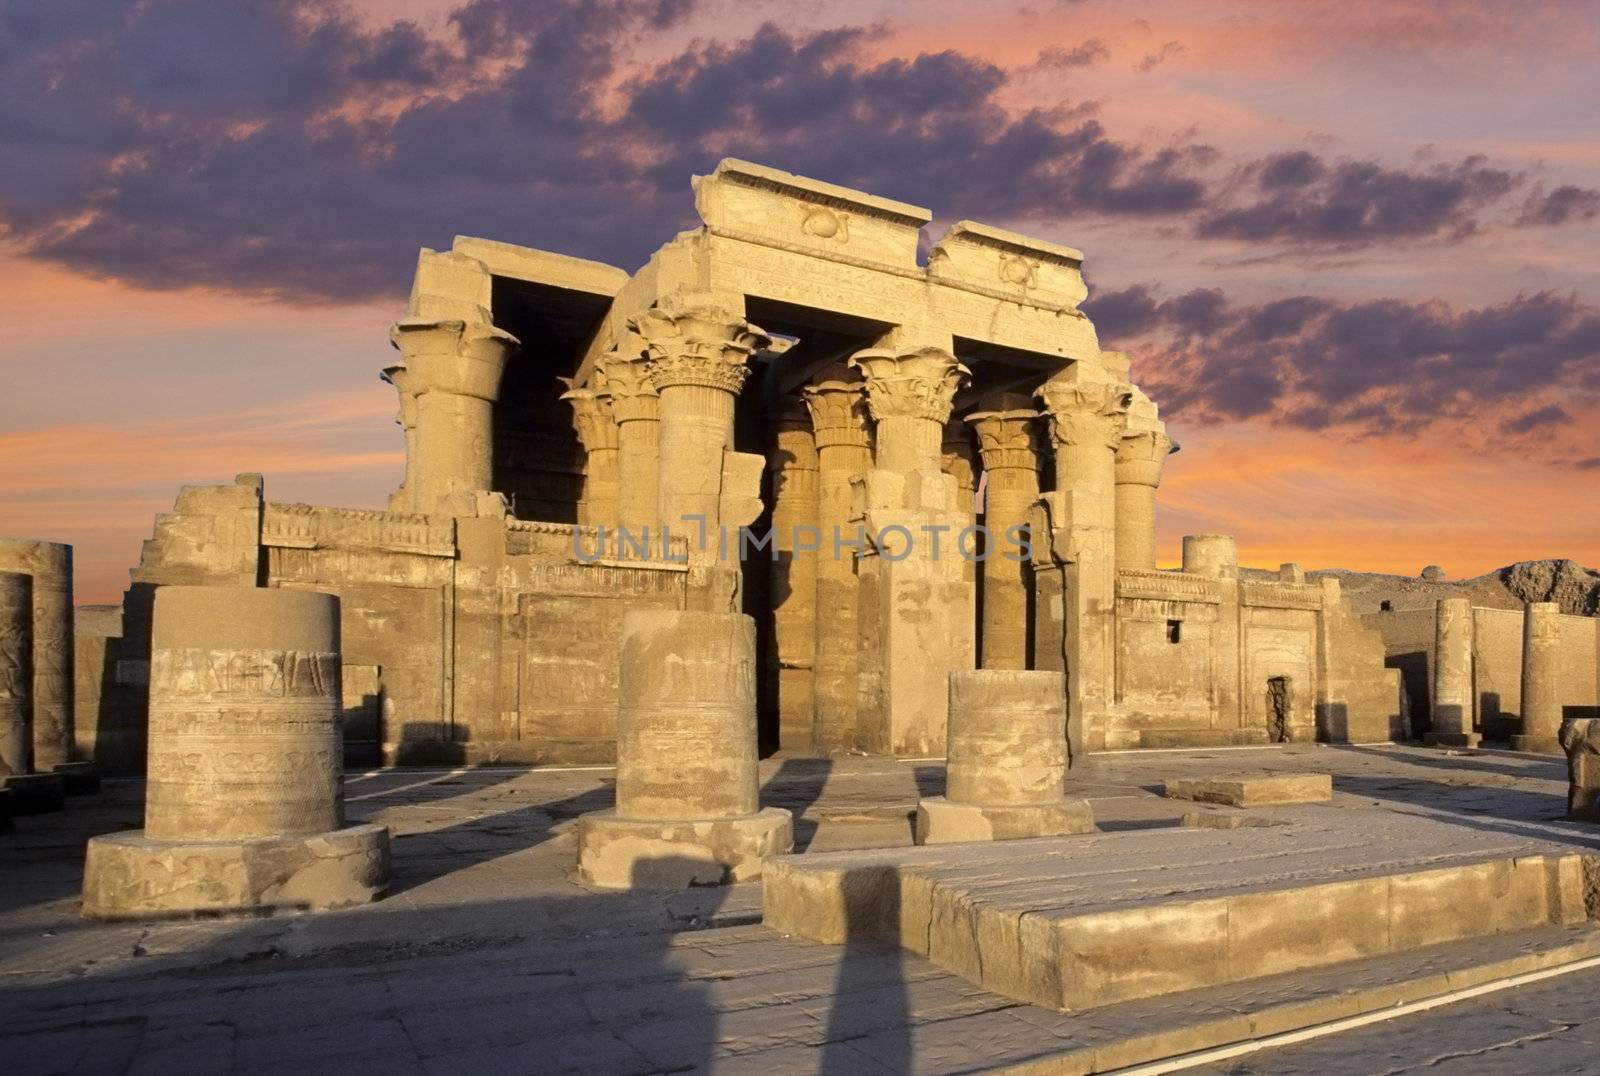 Kom Ombo temple on the Nile river in Egypt